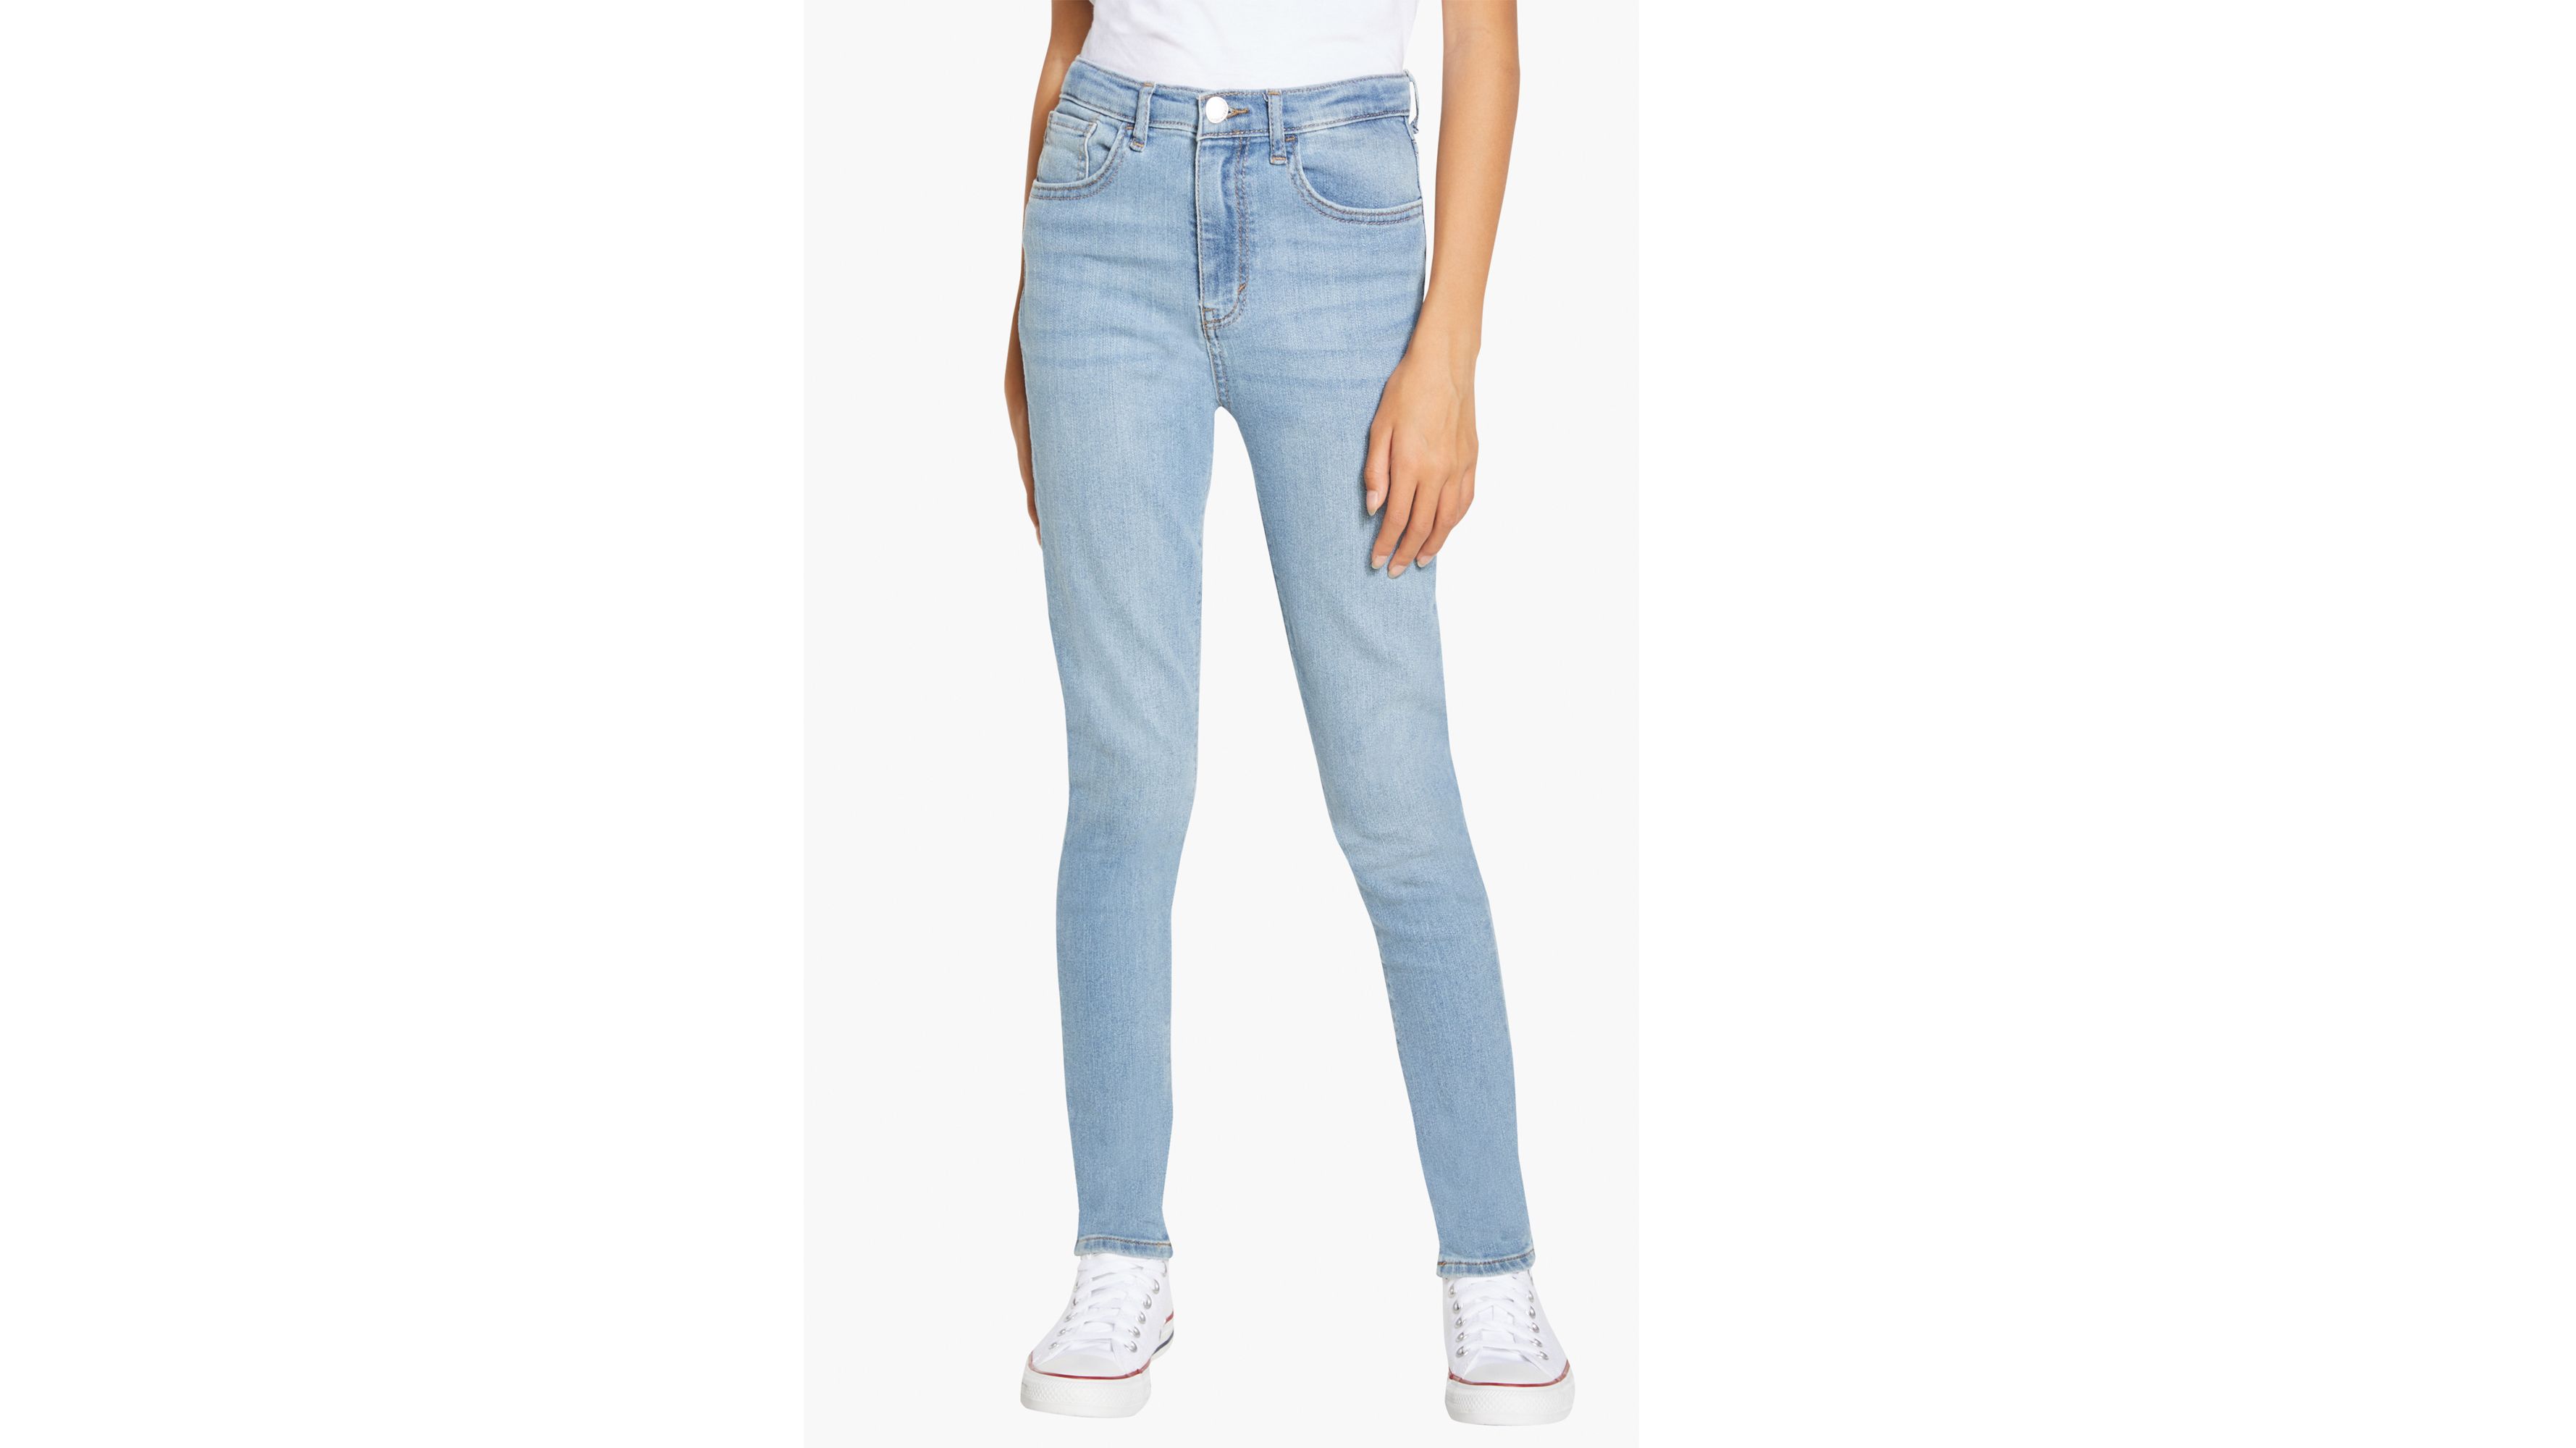 levis girl jeans price